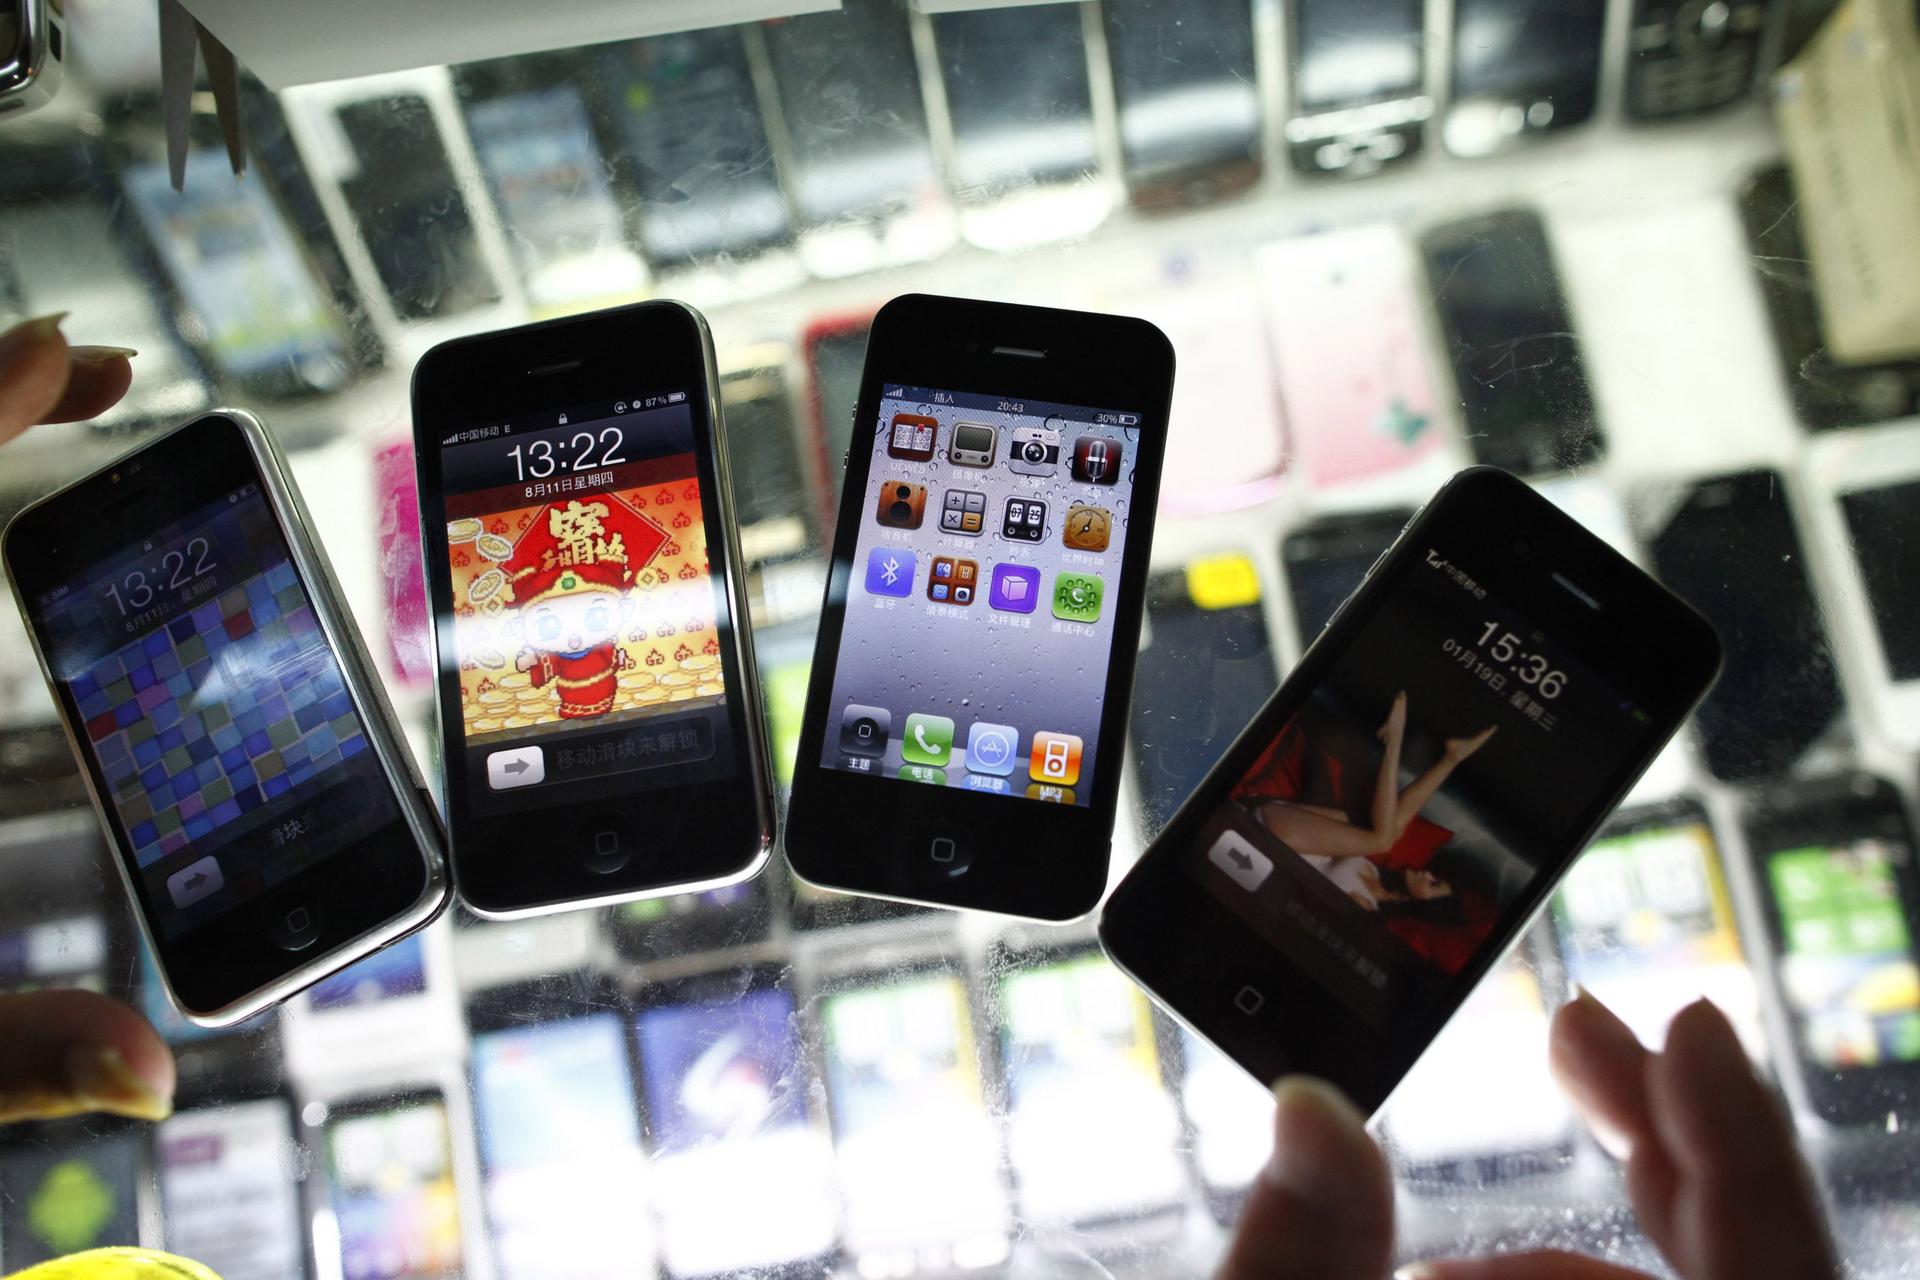 Fake iPhones on sale in Shanghai typify China's copycat prowess, but a forecast wave of innovation could change that image. Photo: Reuters